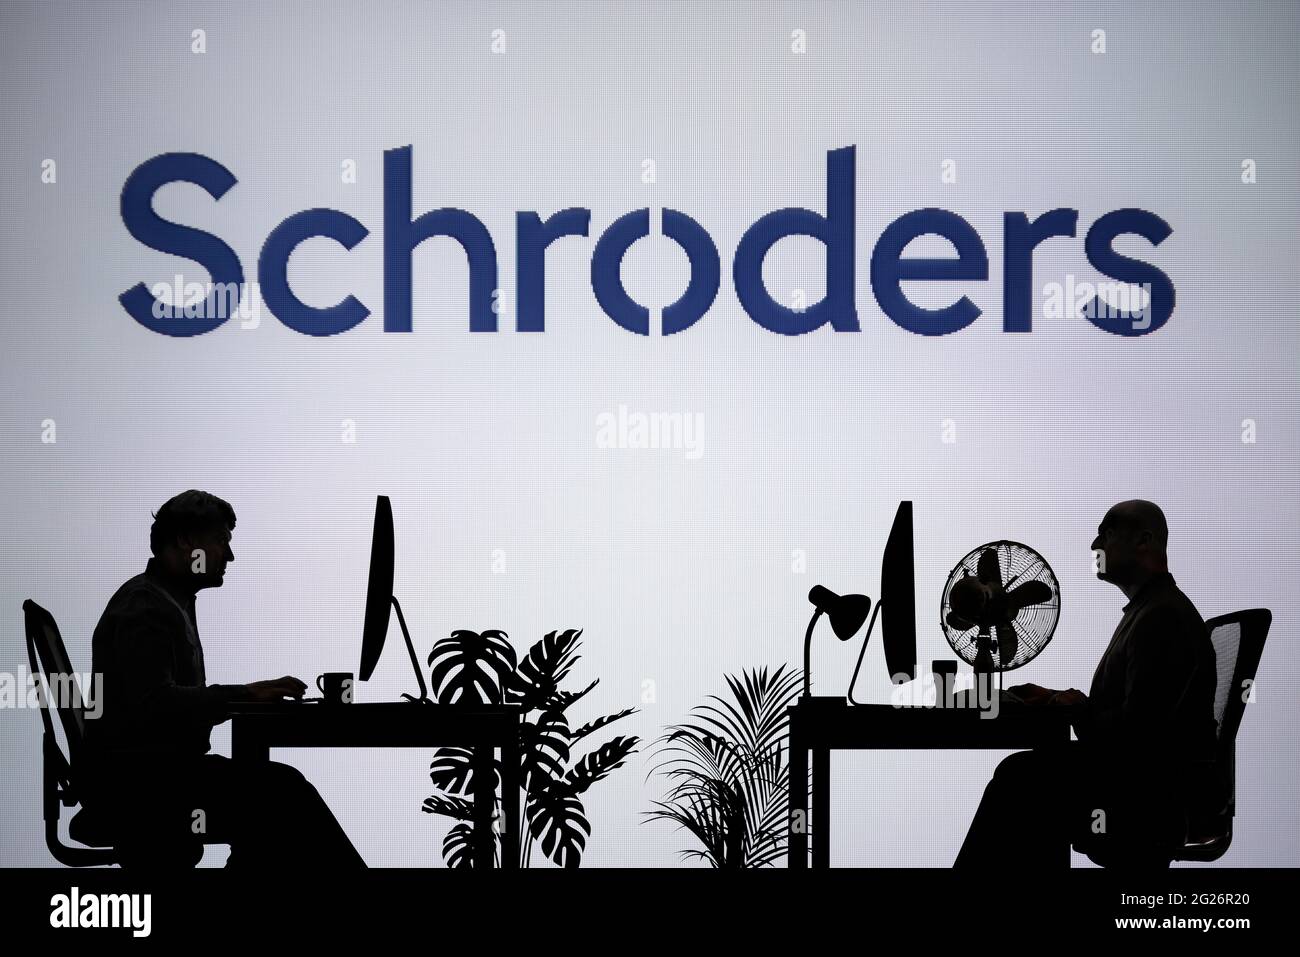 The Schroders logo is seen on an LED screen in the background while two silhouetted people work in an office environment (Editorial use only) Stock Photo